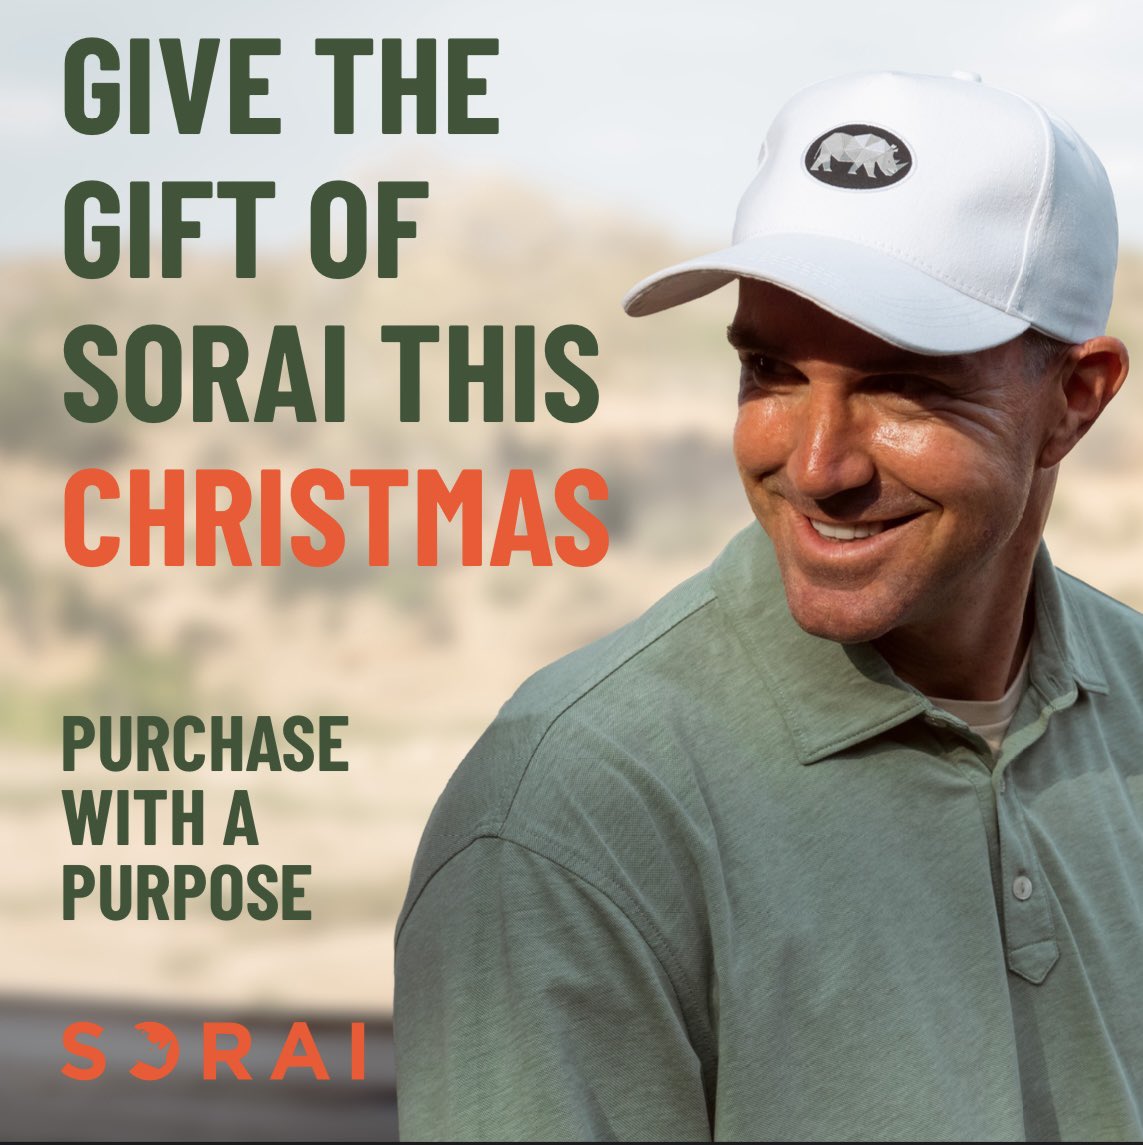 Our Christmas Special is running now through December 24th, until 23:30! SPEND £50 and unlock the magic! - Get ANY SORAI CAP at HALF PRICE when you use CODE XMAS23 at checkout! #wearSORAI #conservation #wildlife #christmasfeeling